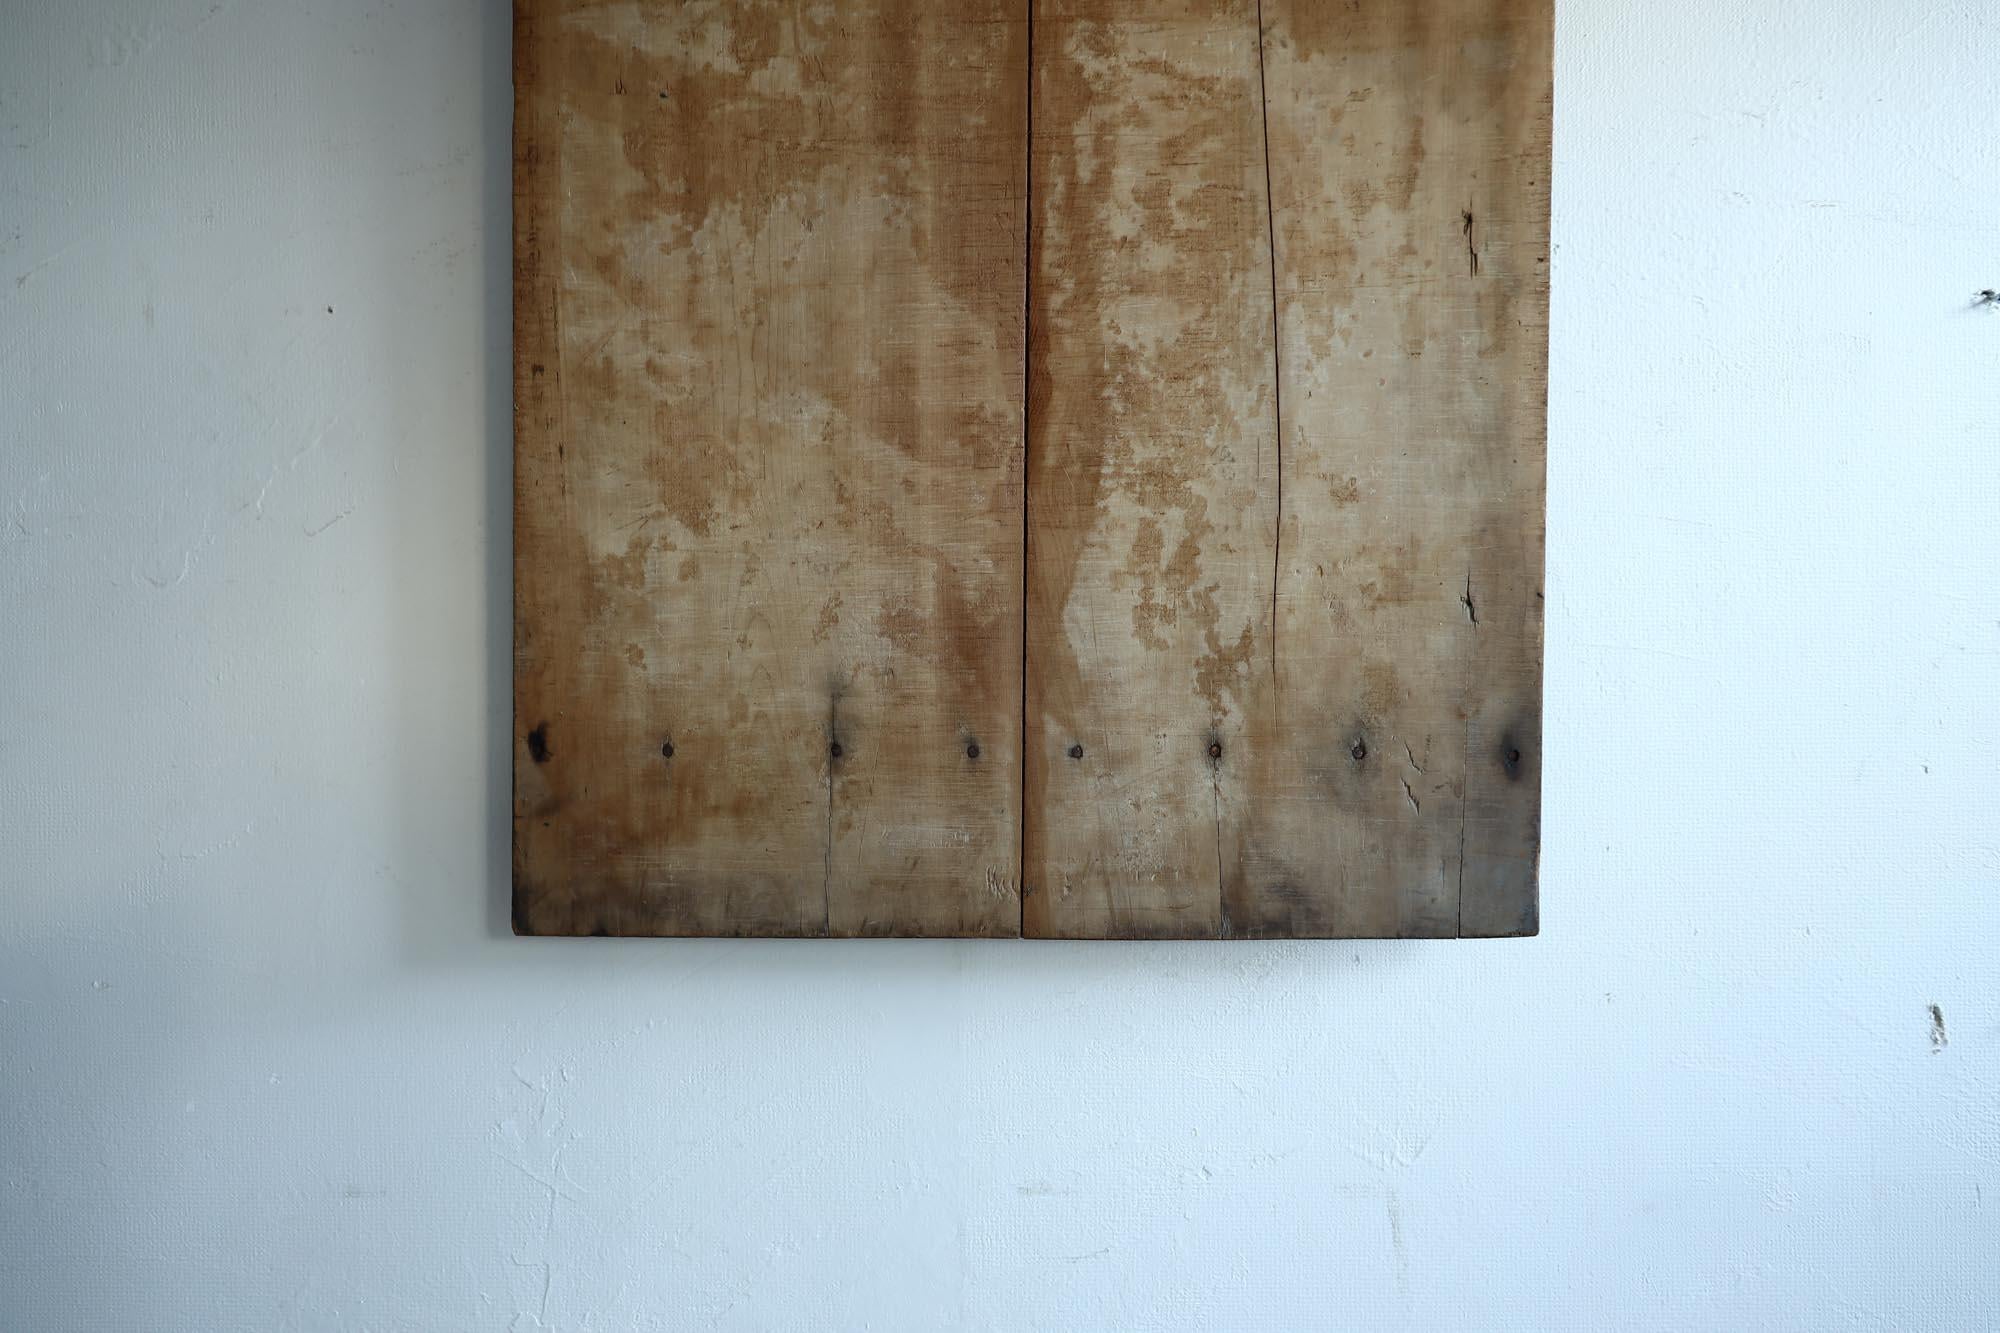 Japanese Antique Wooden Board, 